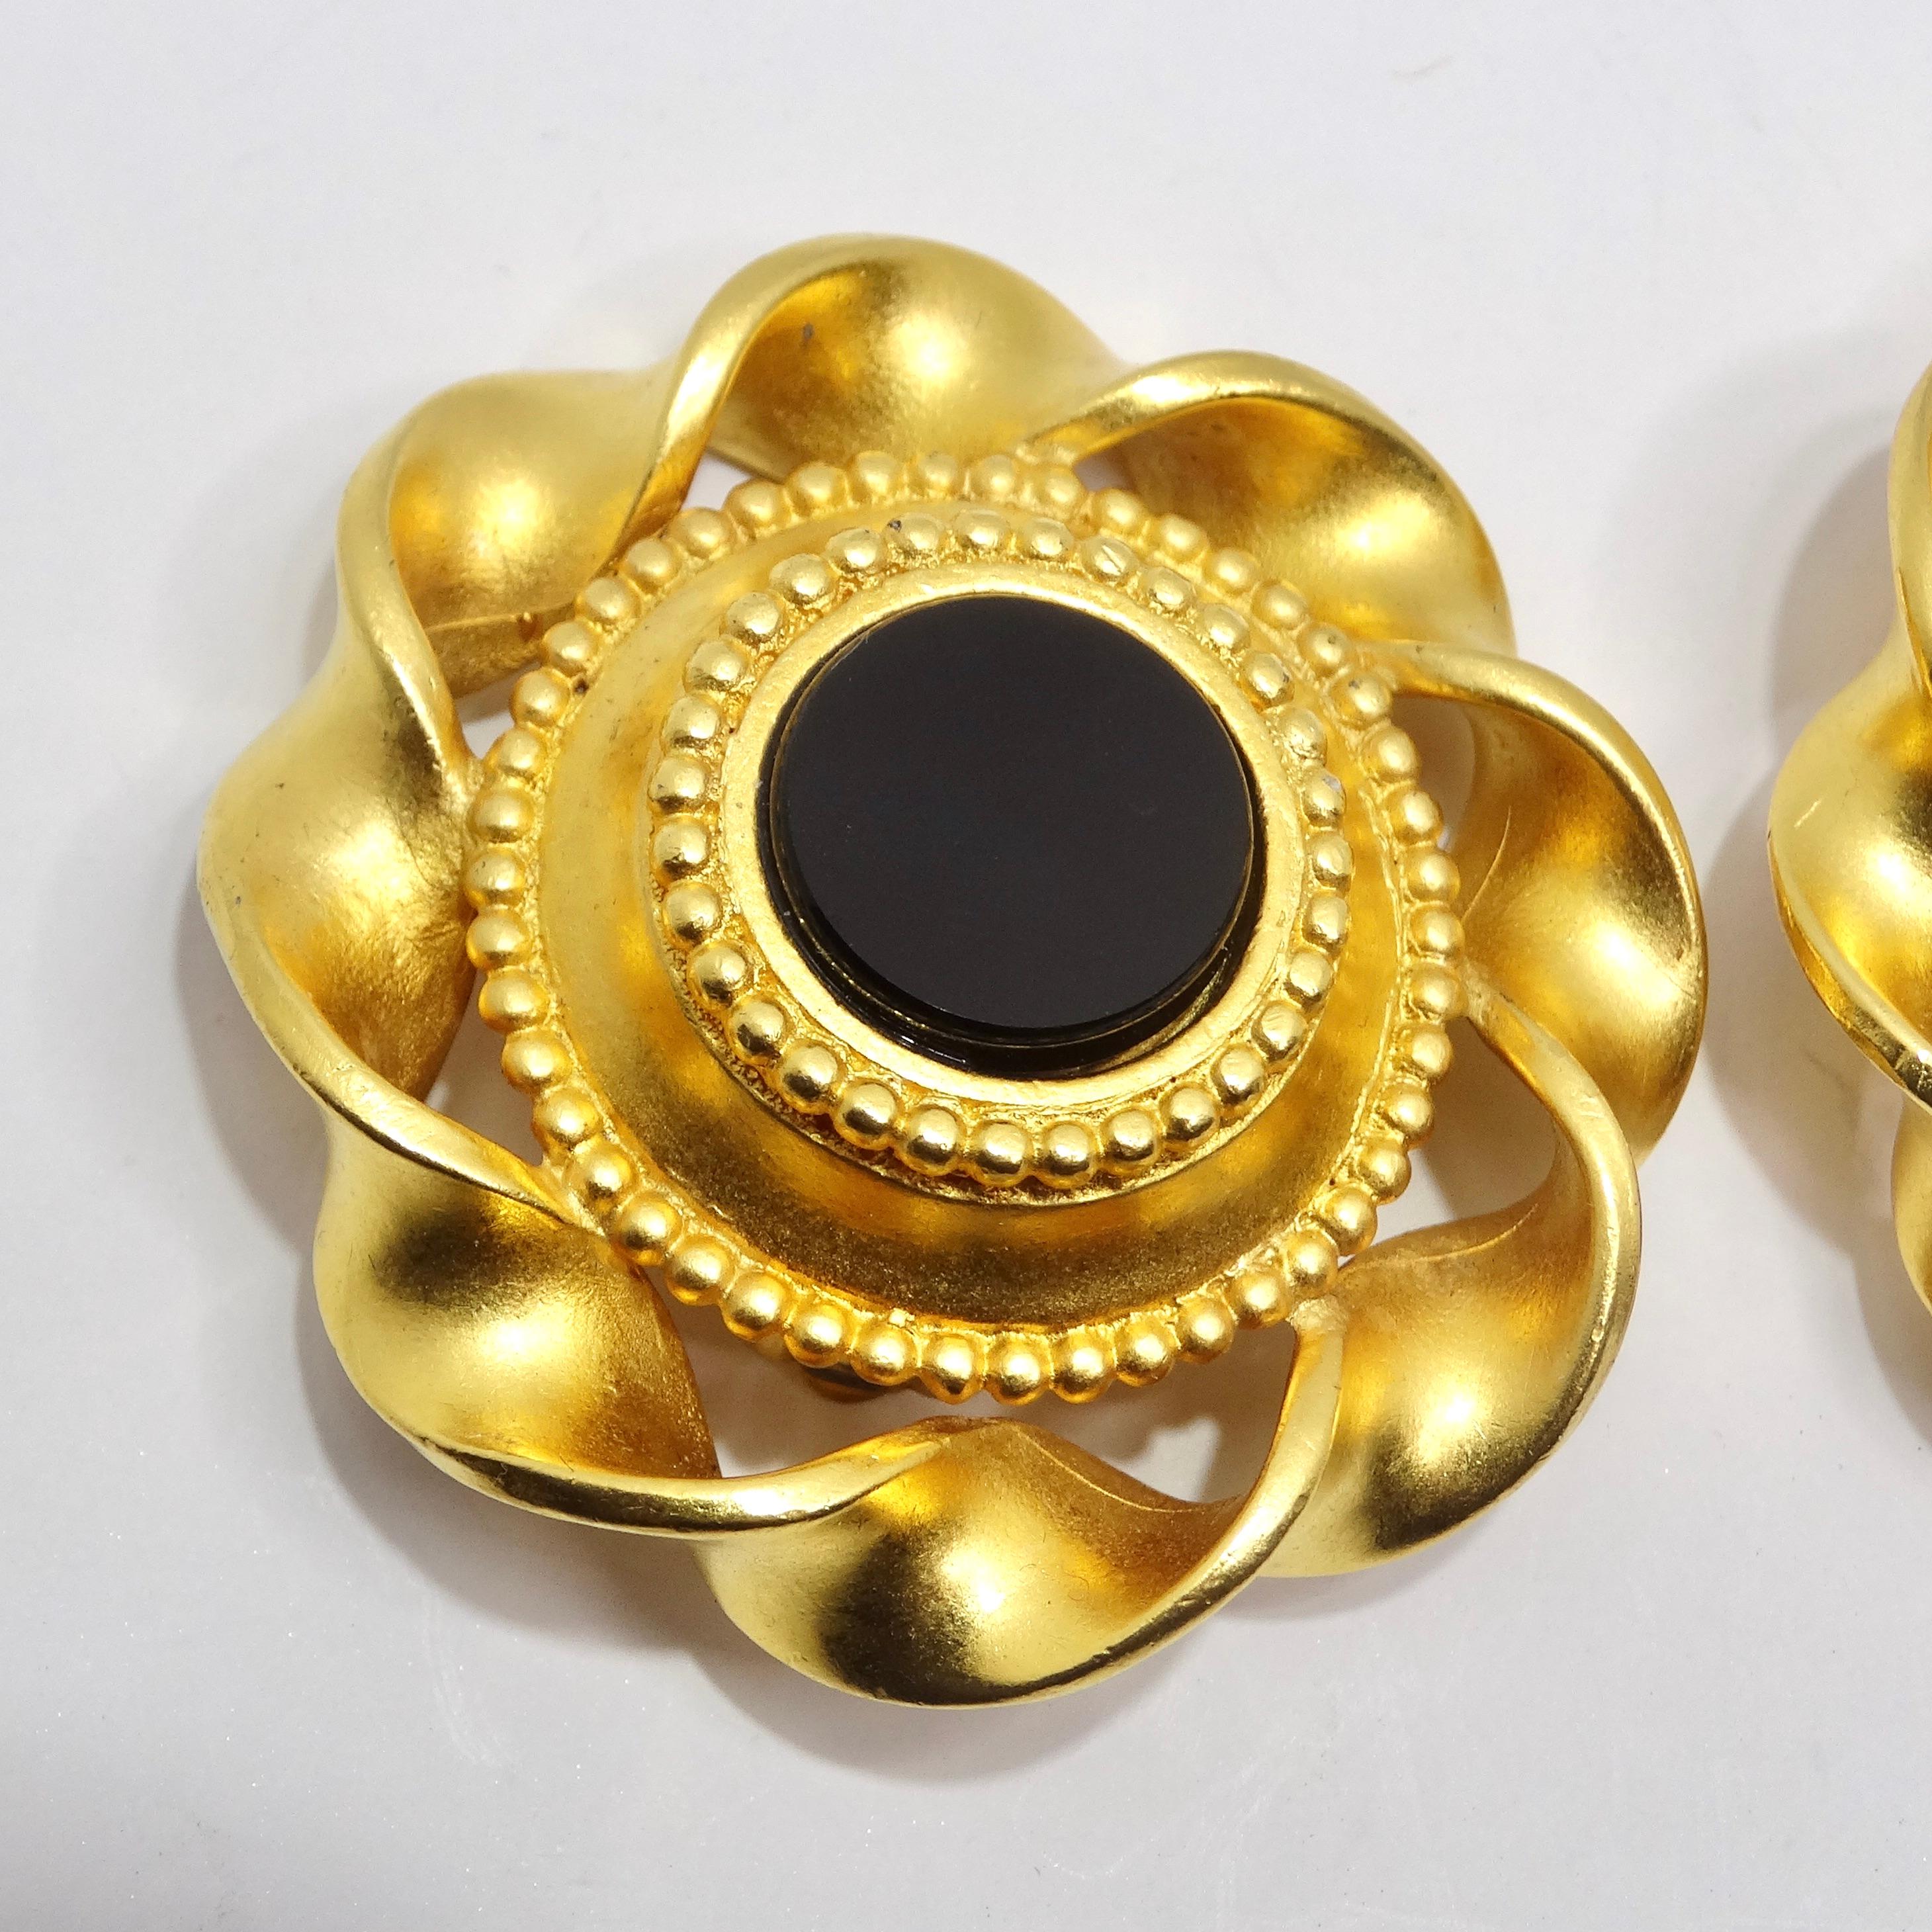 Do not miss out on a pair of statement earrings from the 1980s, these Karl Lagerfeld Gold Tone Black Stone Clip-On Earrings are the epitome of timeless chic. The shiny yellow gold-plated design exudes vintage elegance, capturing the glamour and